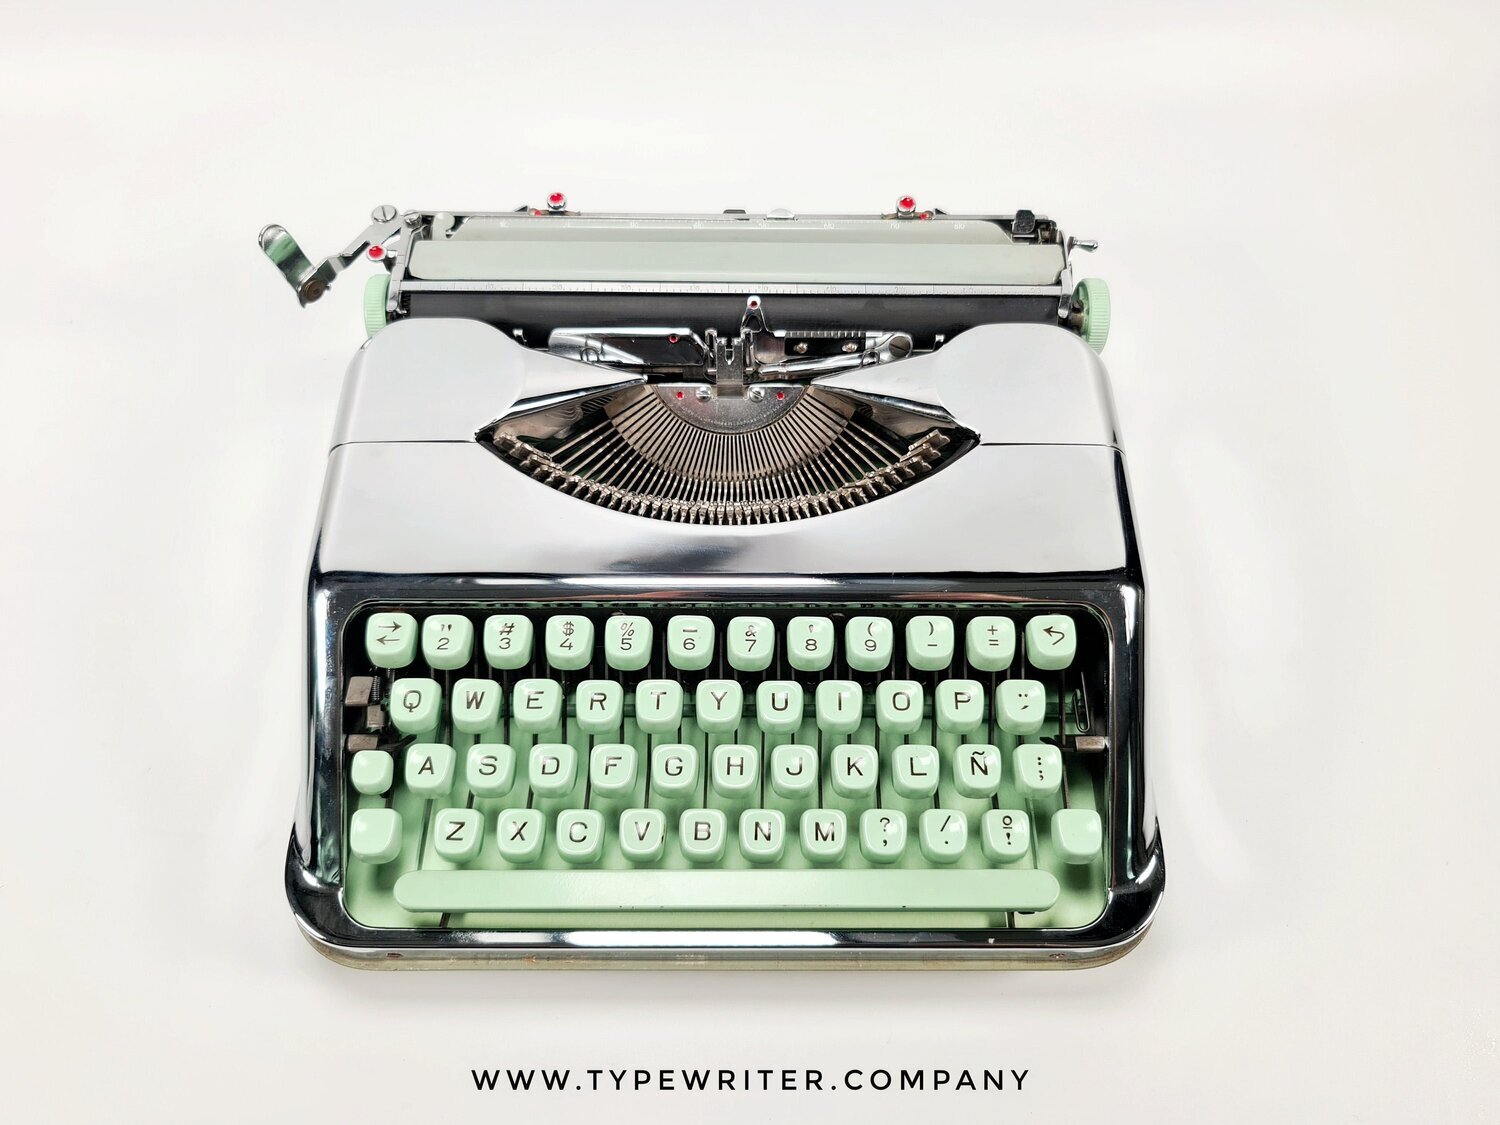 Limited Edition Hermes Baby Chrome Plated Typewriter, Green Fund, Vintage, Manual Portable, Professionally Serviced by Typewriter.Company